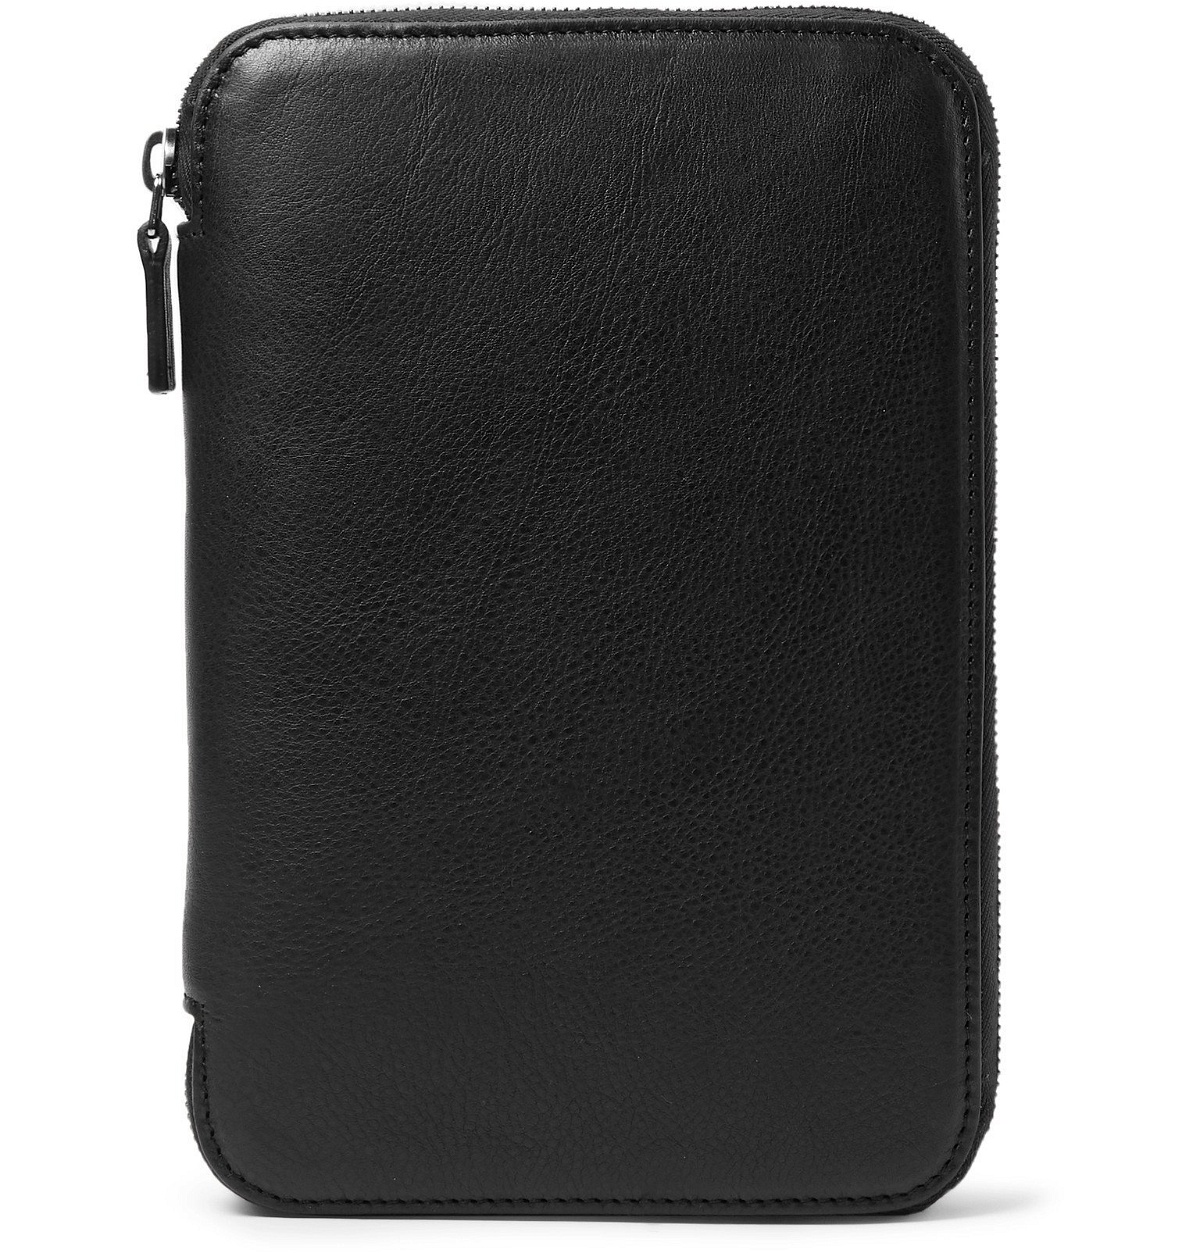 Photo: This Is Ground - Mod Tablet Mini Full-Grain Leather Pouch - Black